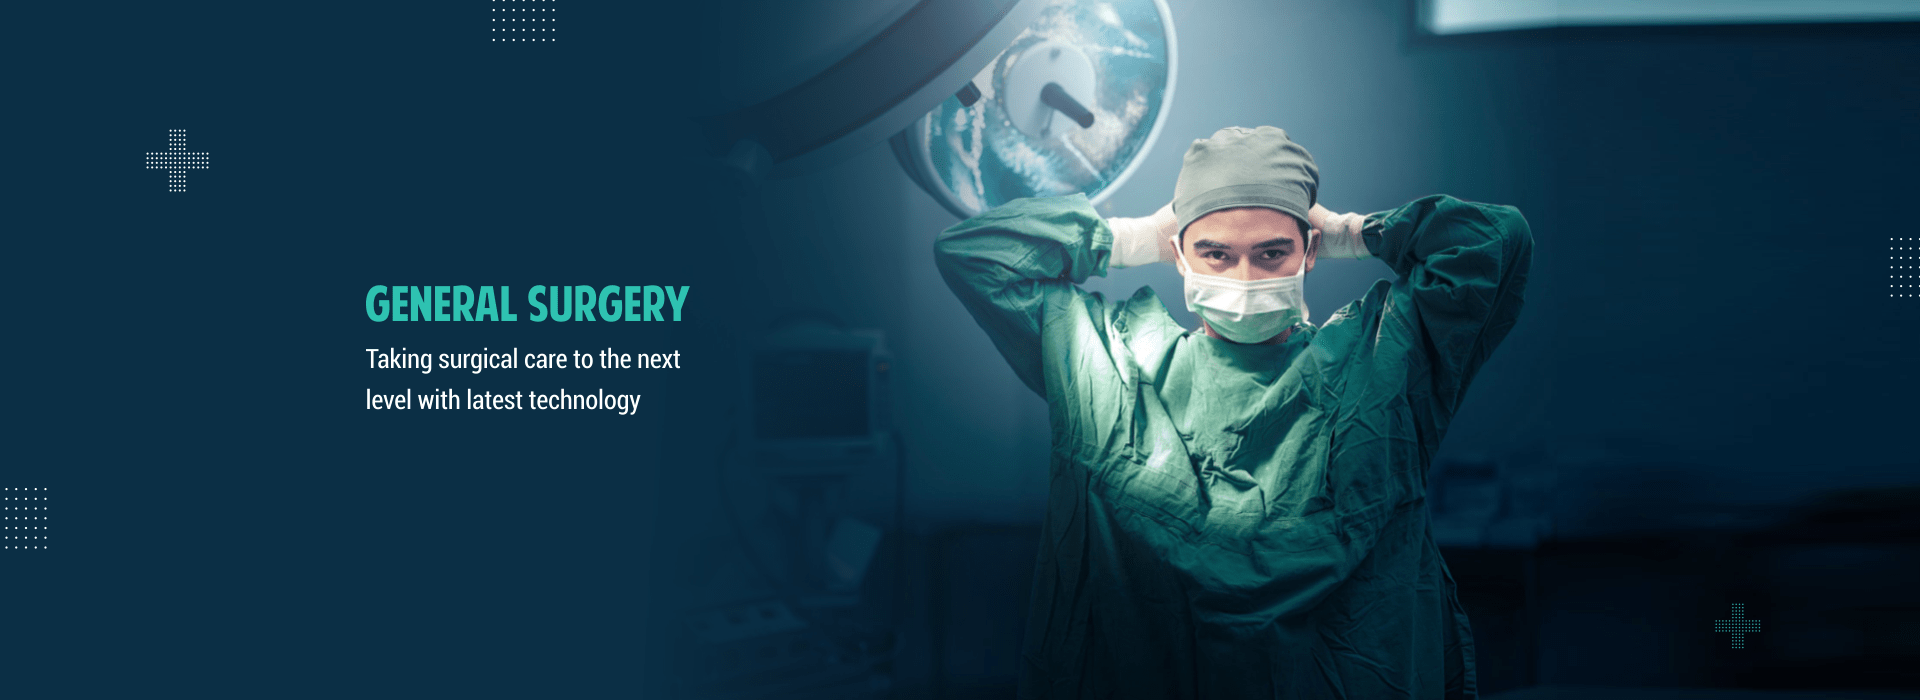 urology, andrology, general and advanced laparoscopic surgery